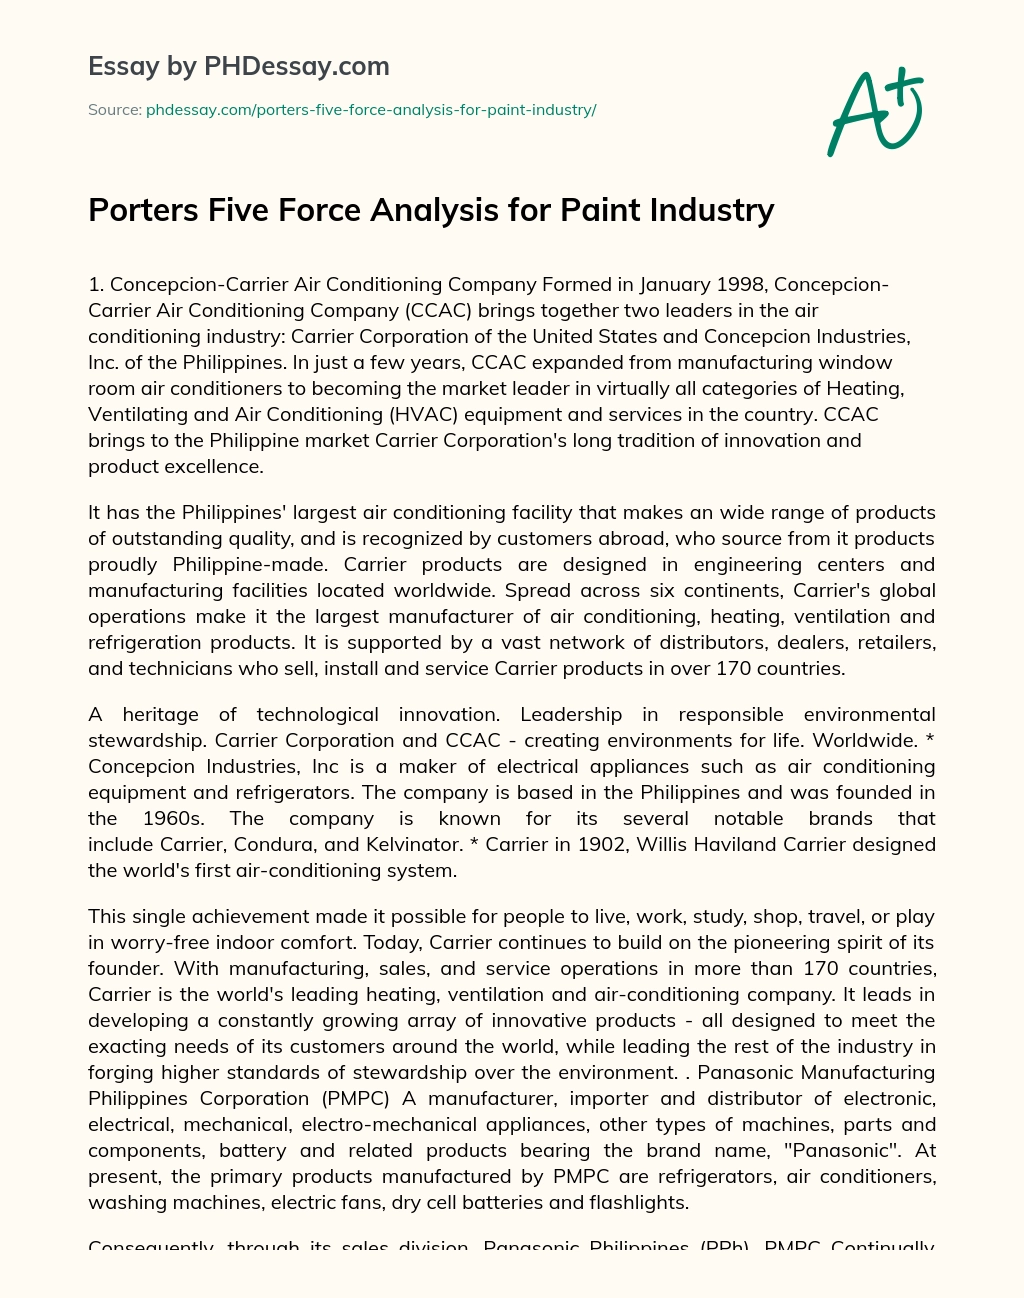 Porters Five Force Analysis for Paint Industry essay